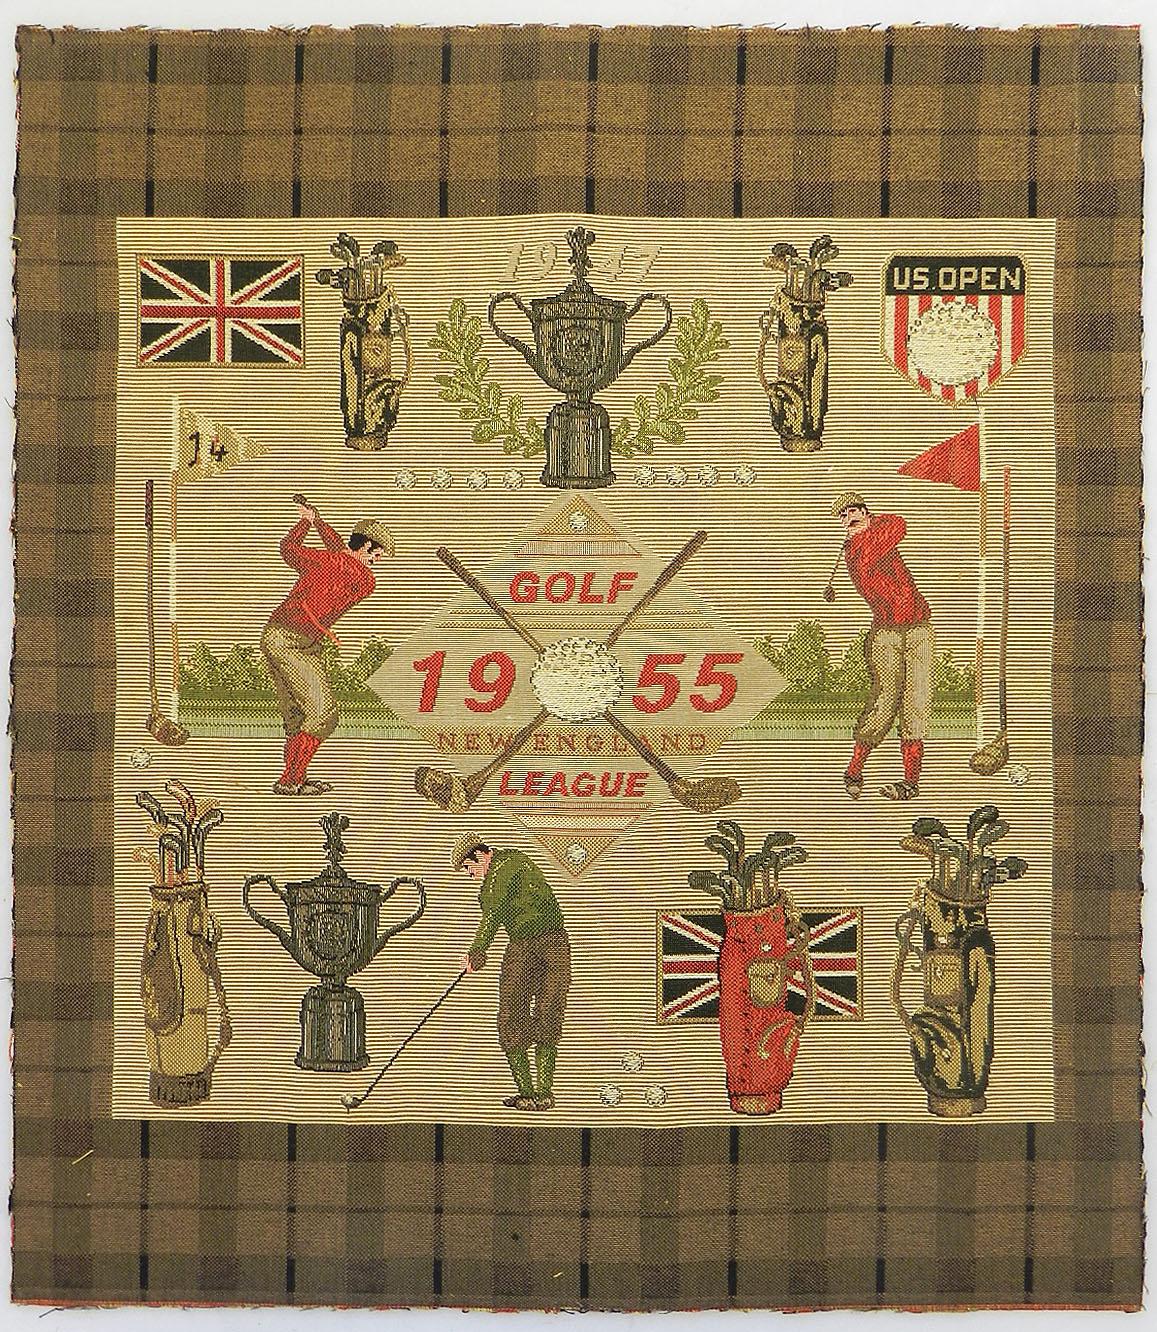 Needlework Midcentury Golf US Open Commemorative Picture Tapestry New England League c1955